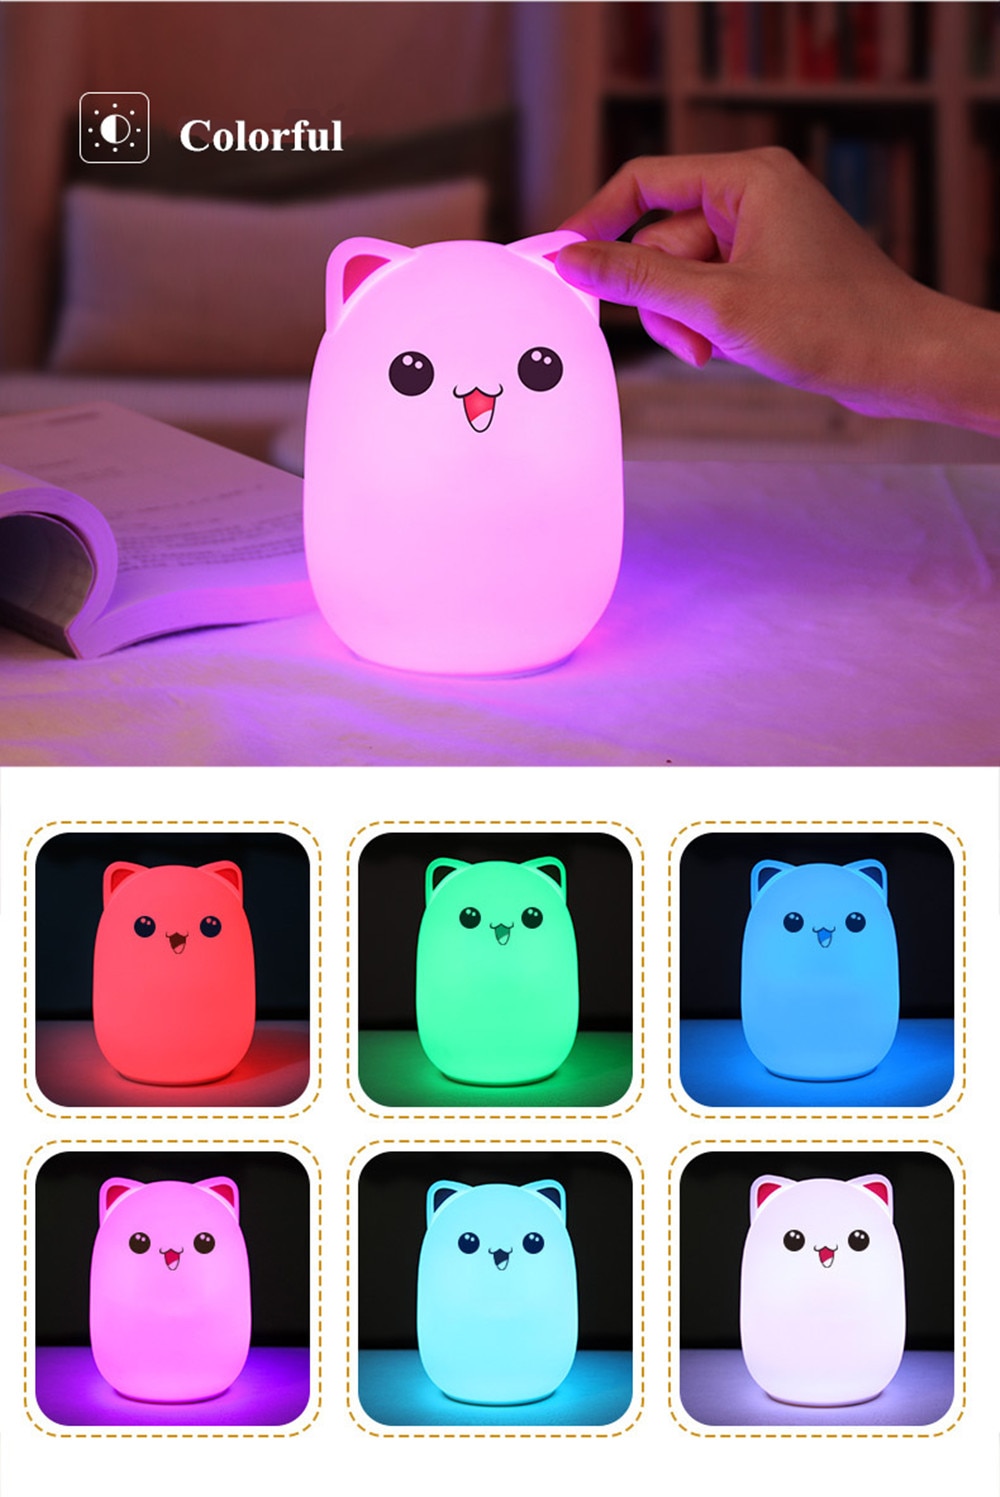 Colorful LED Night Light Lovely Silicone Cartoon Bear Rechargeable Touch Desk Bedroom Decor Tablet Lamp for Kids Girl (4)